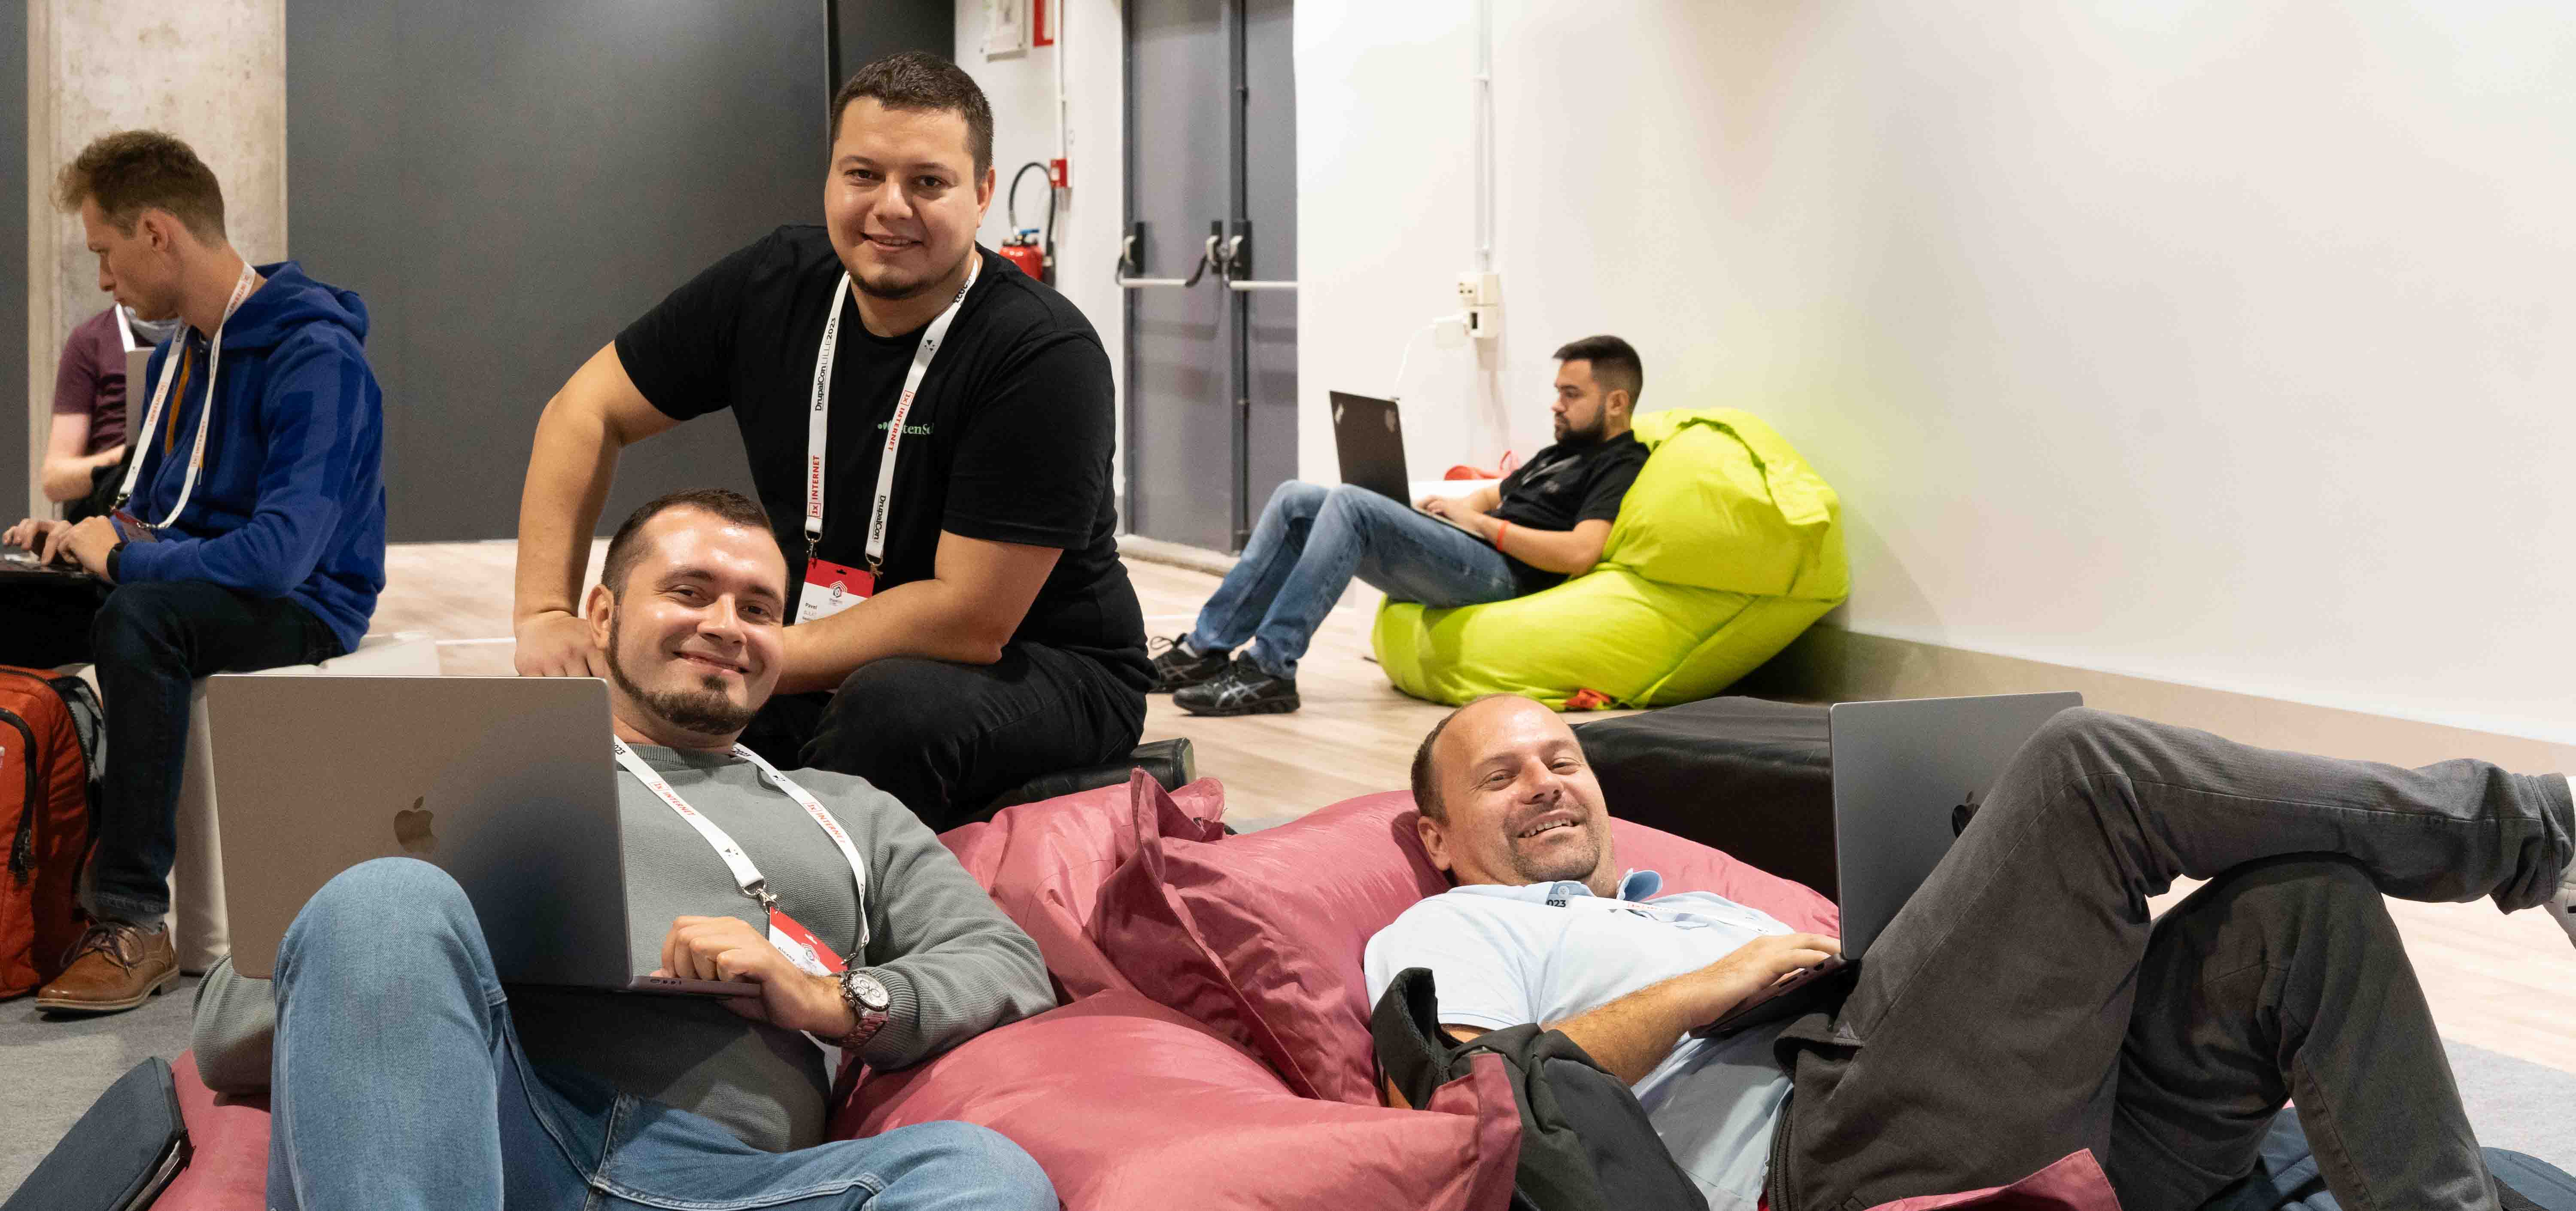 three software engineers at a conference sitting on beanbags